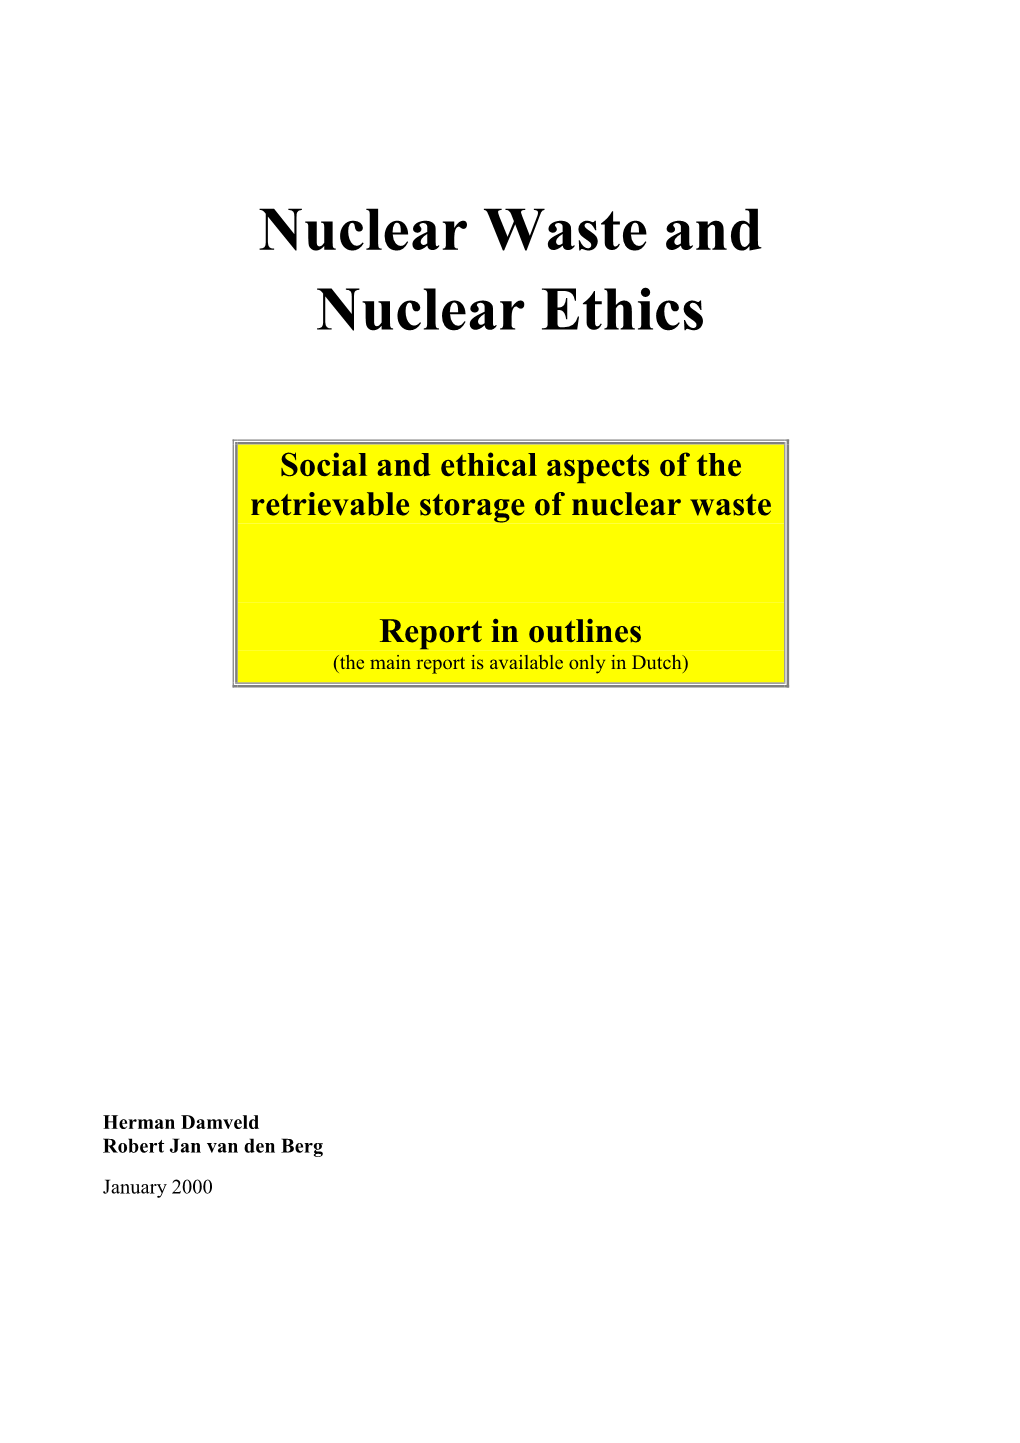 Nuclear Waste and Nuclear Ethics